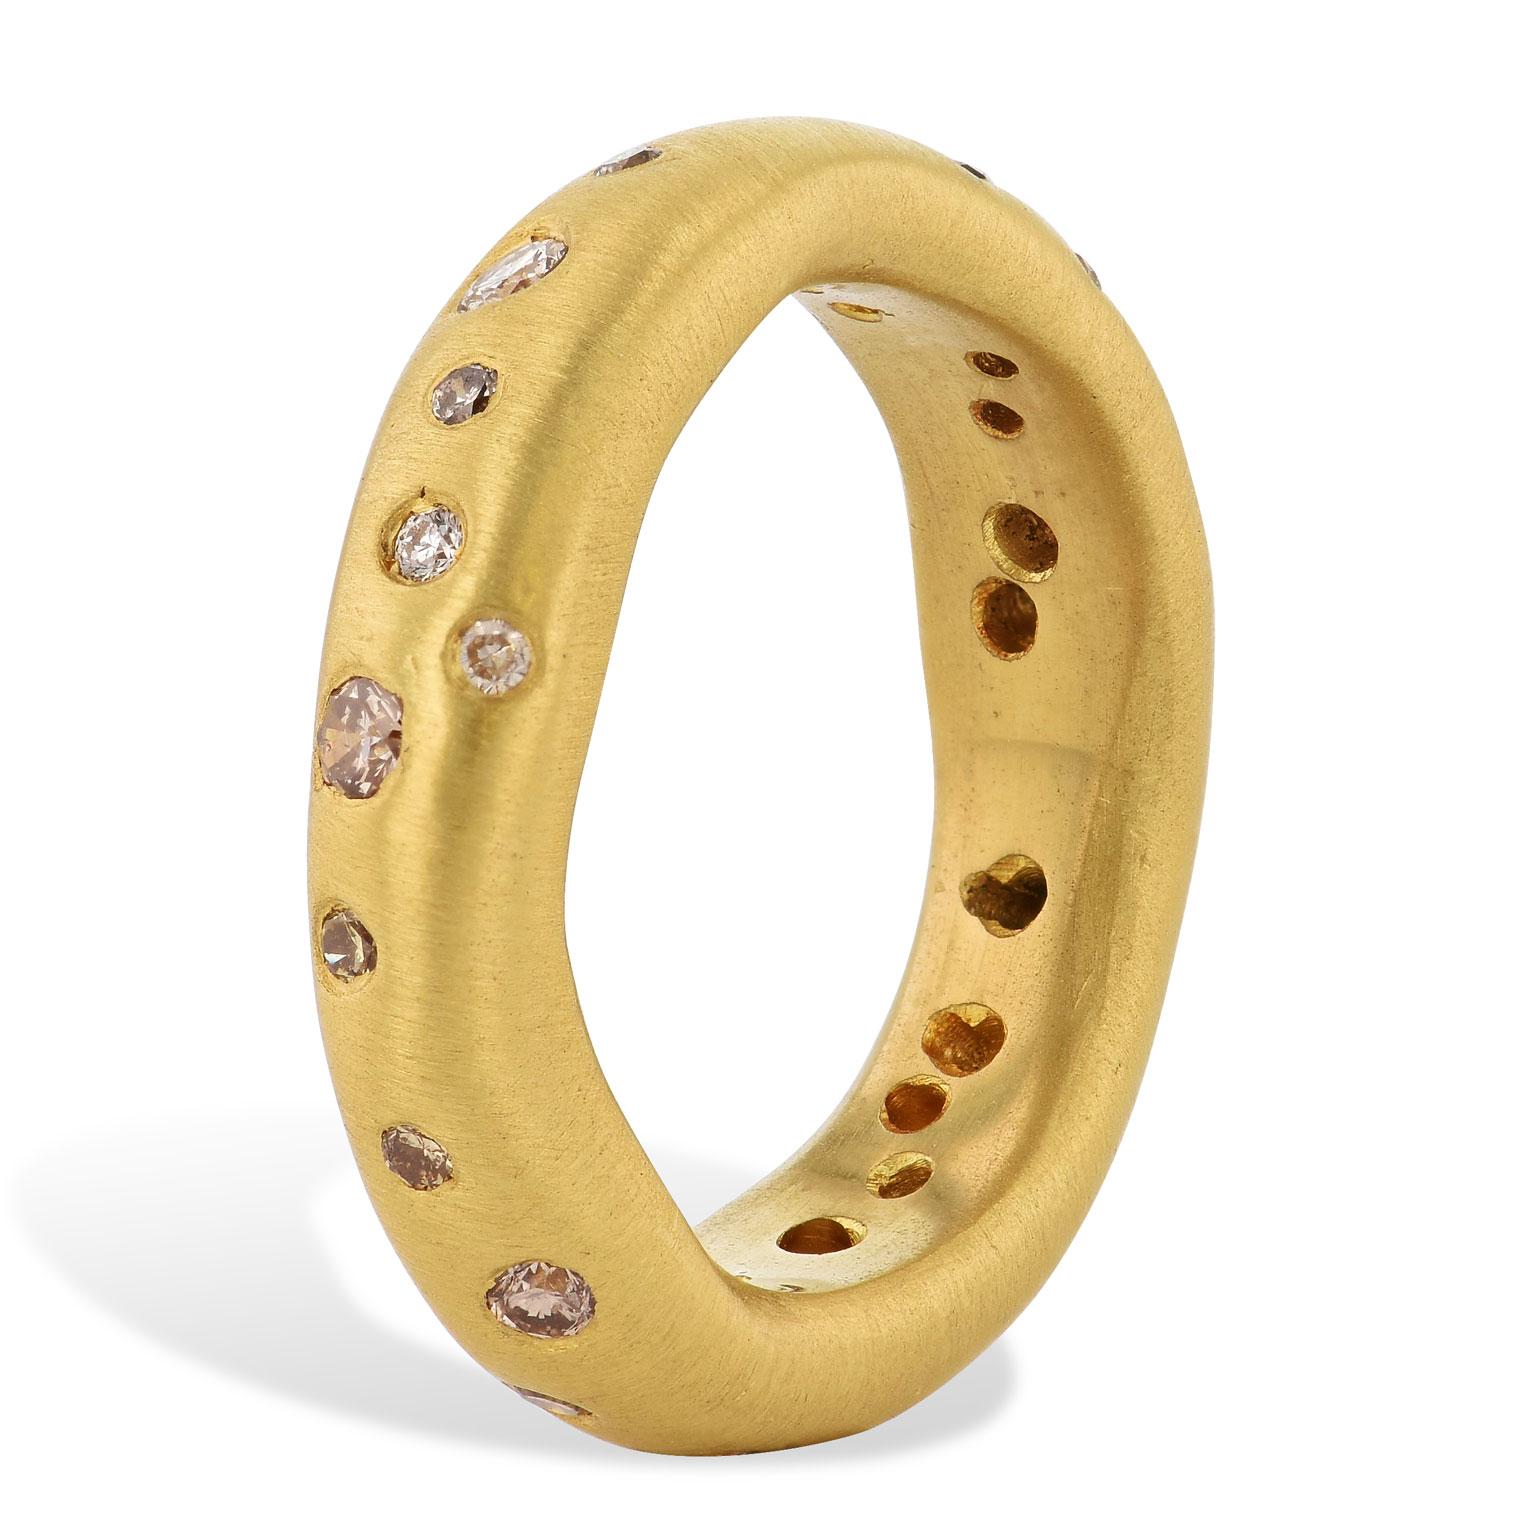 This handmade oblong-shaped 22 karat brushed yellow gold band ring features 0.32 carat of diamond in flush setting. With a non-traditional shape and construction, this band ring reflects a raw yet stylized design.